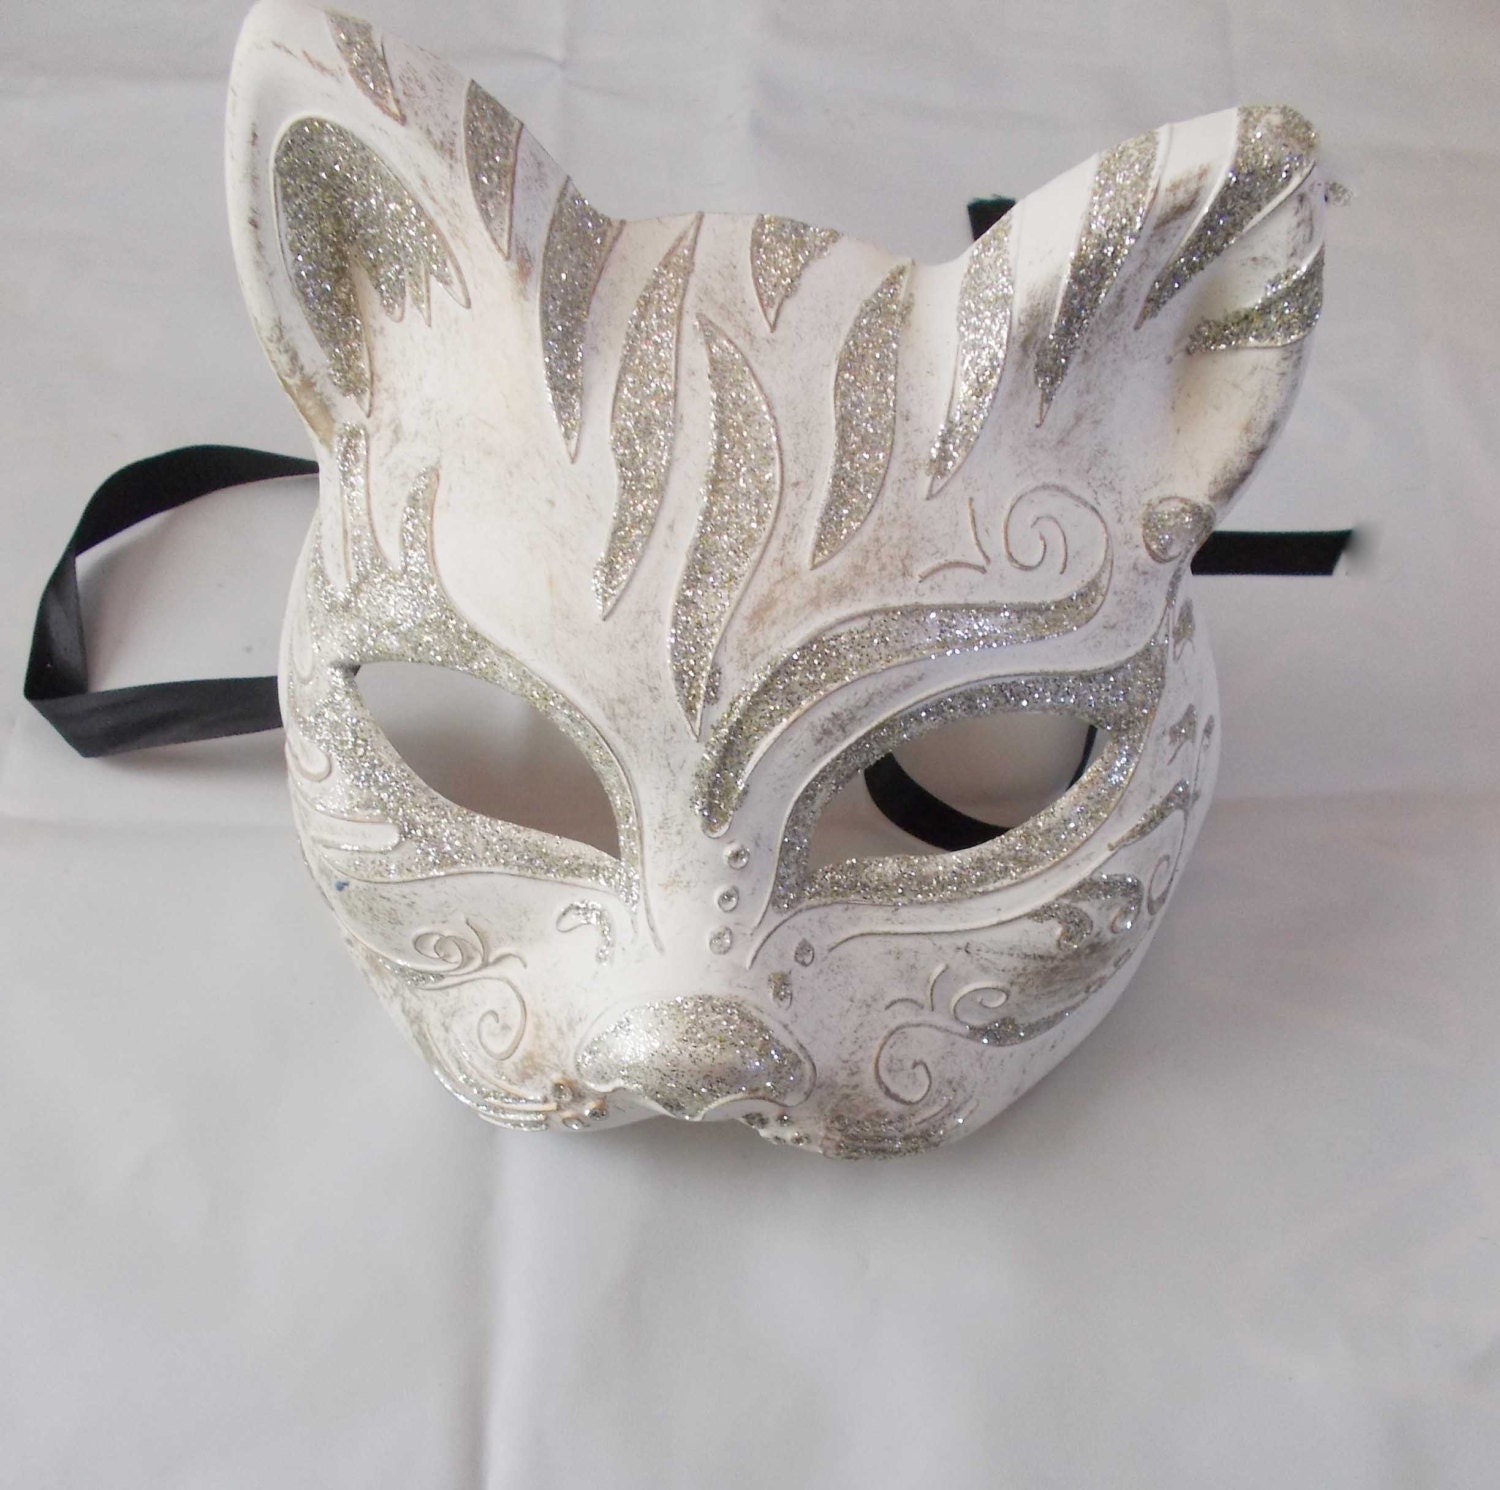 Gatto mask masquerade handmade of plaster and putty cat mask